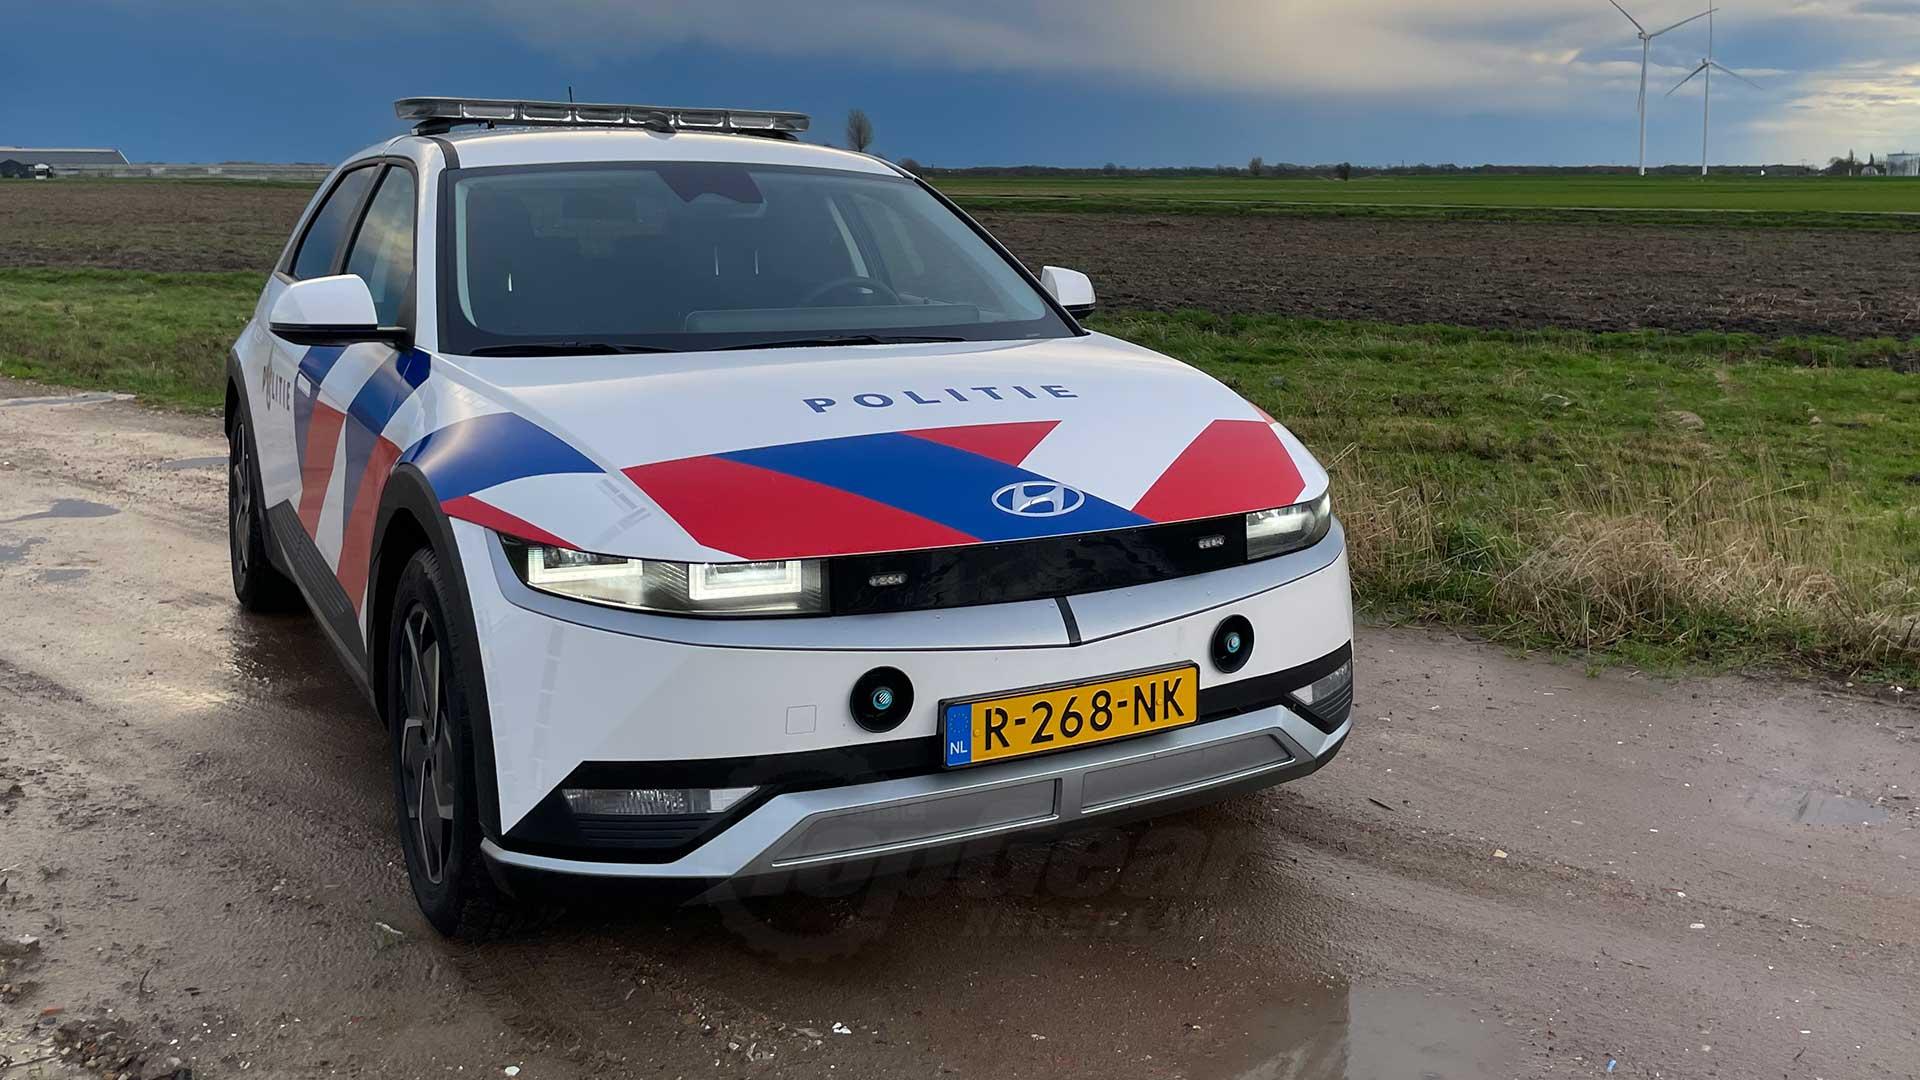 The front of the Hyundai Ioniq 5 as an electric police car in the Netherlands